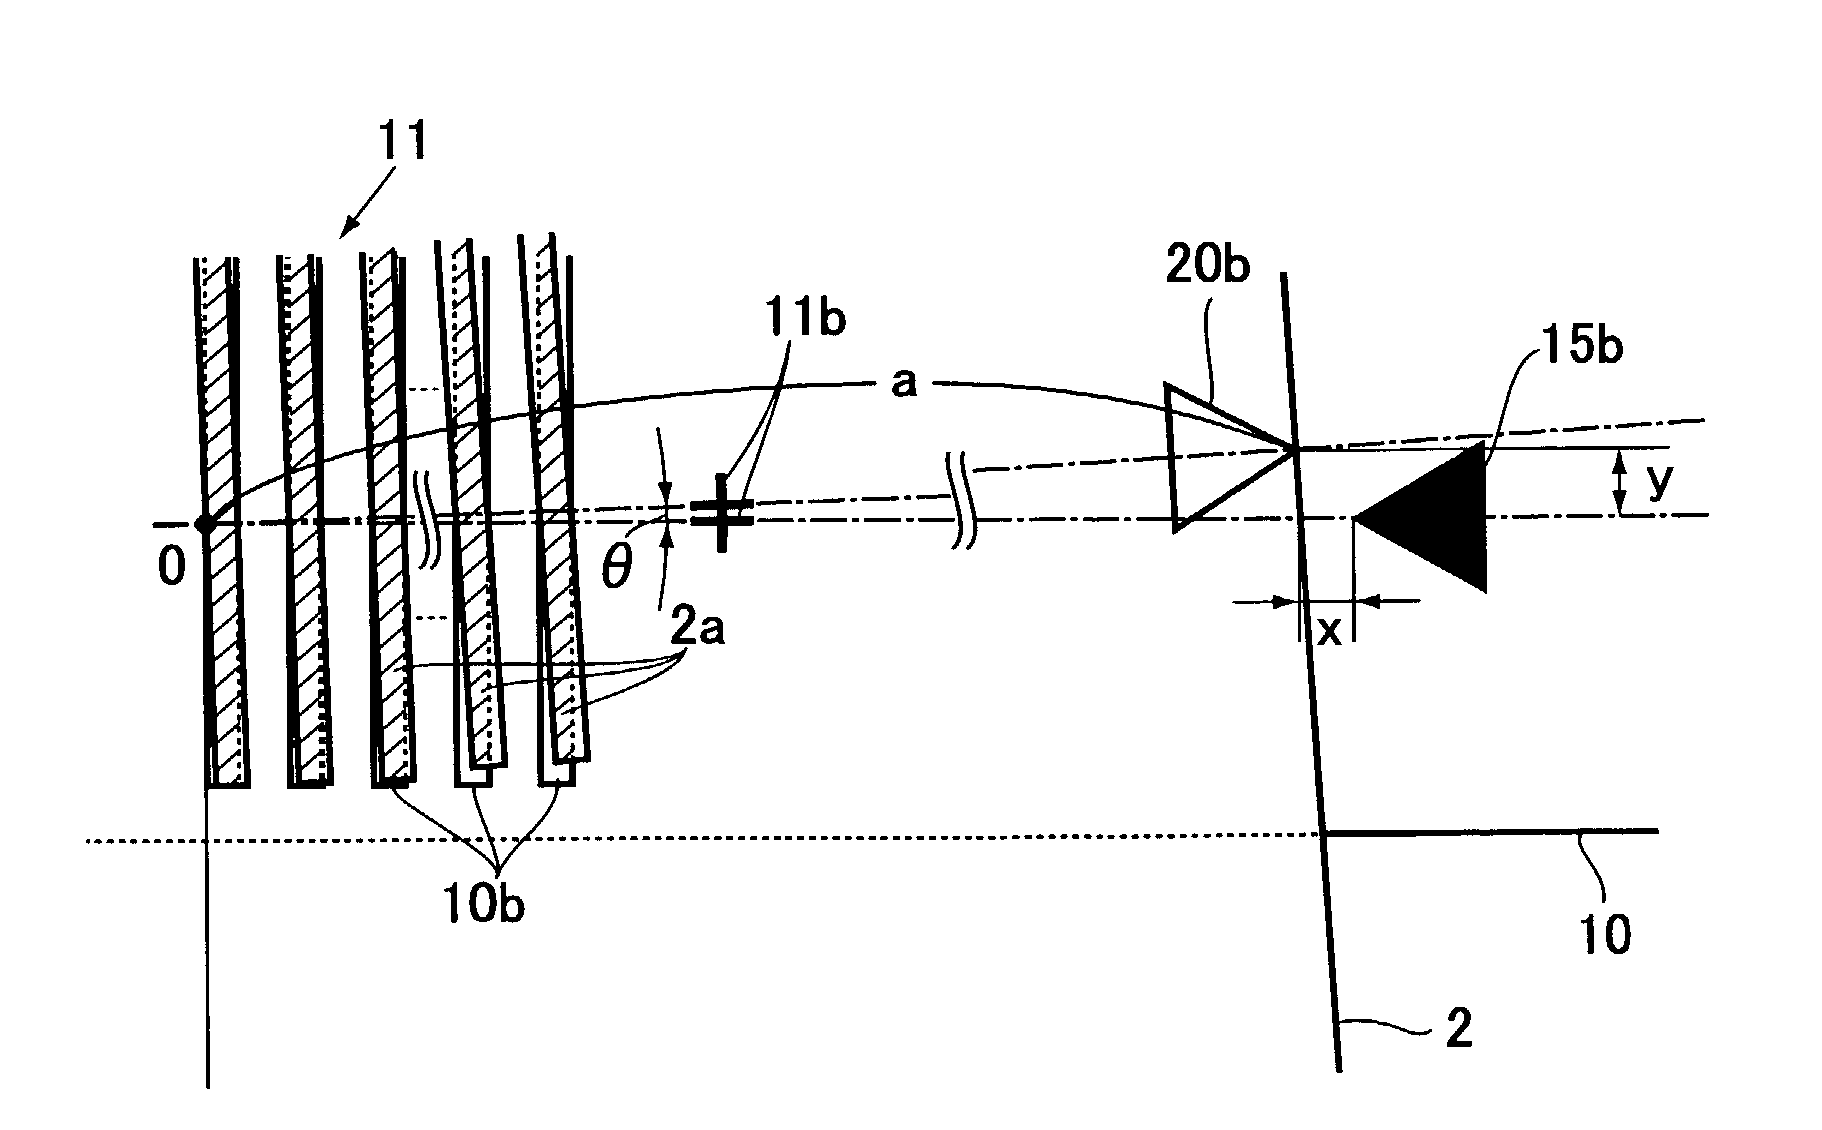 Mark for visual inspection upon assembling a display